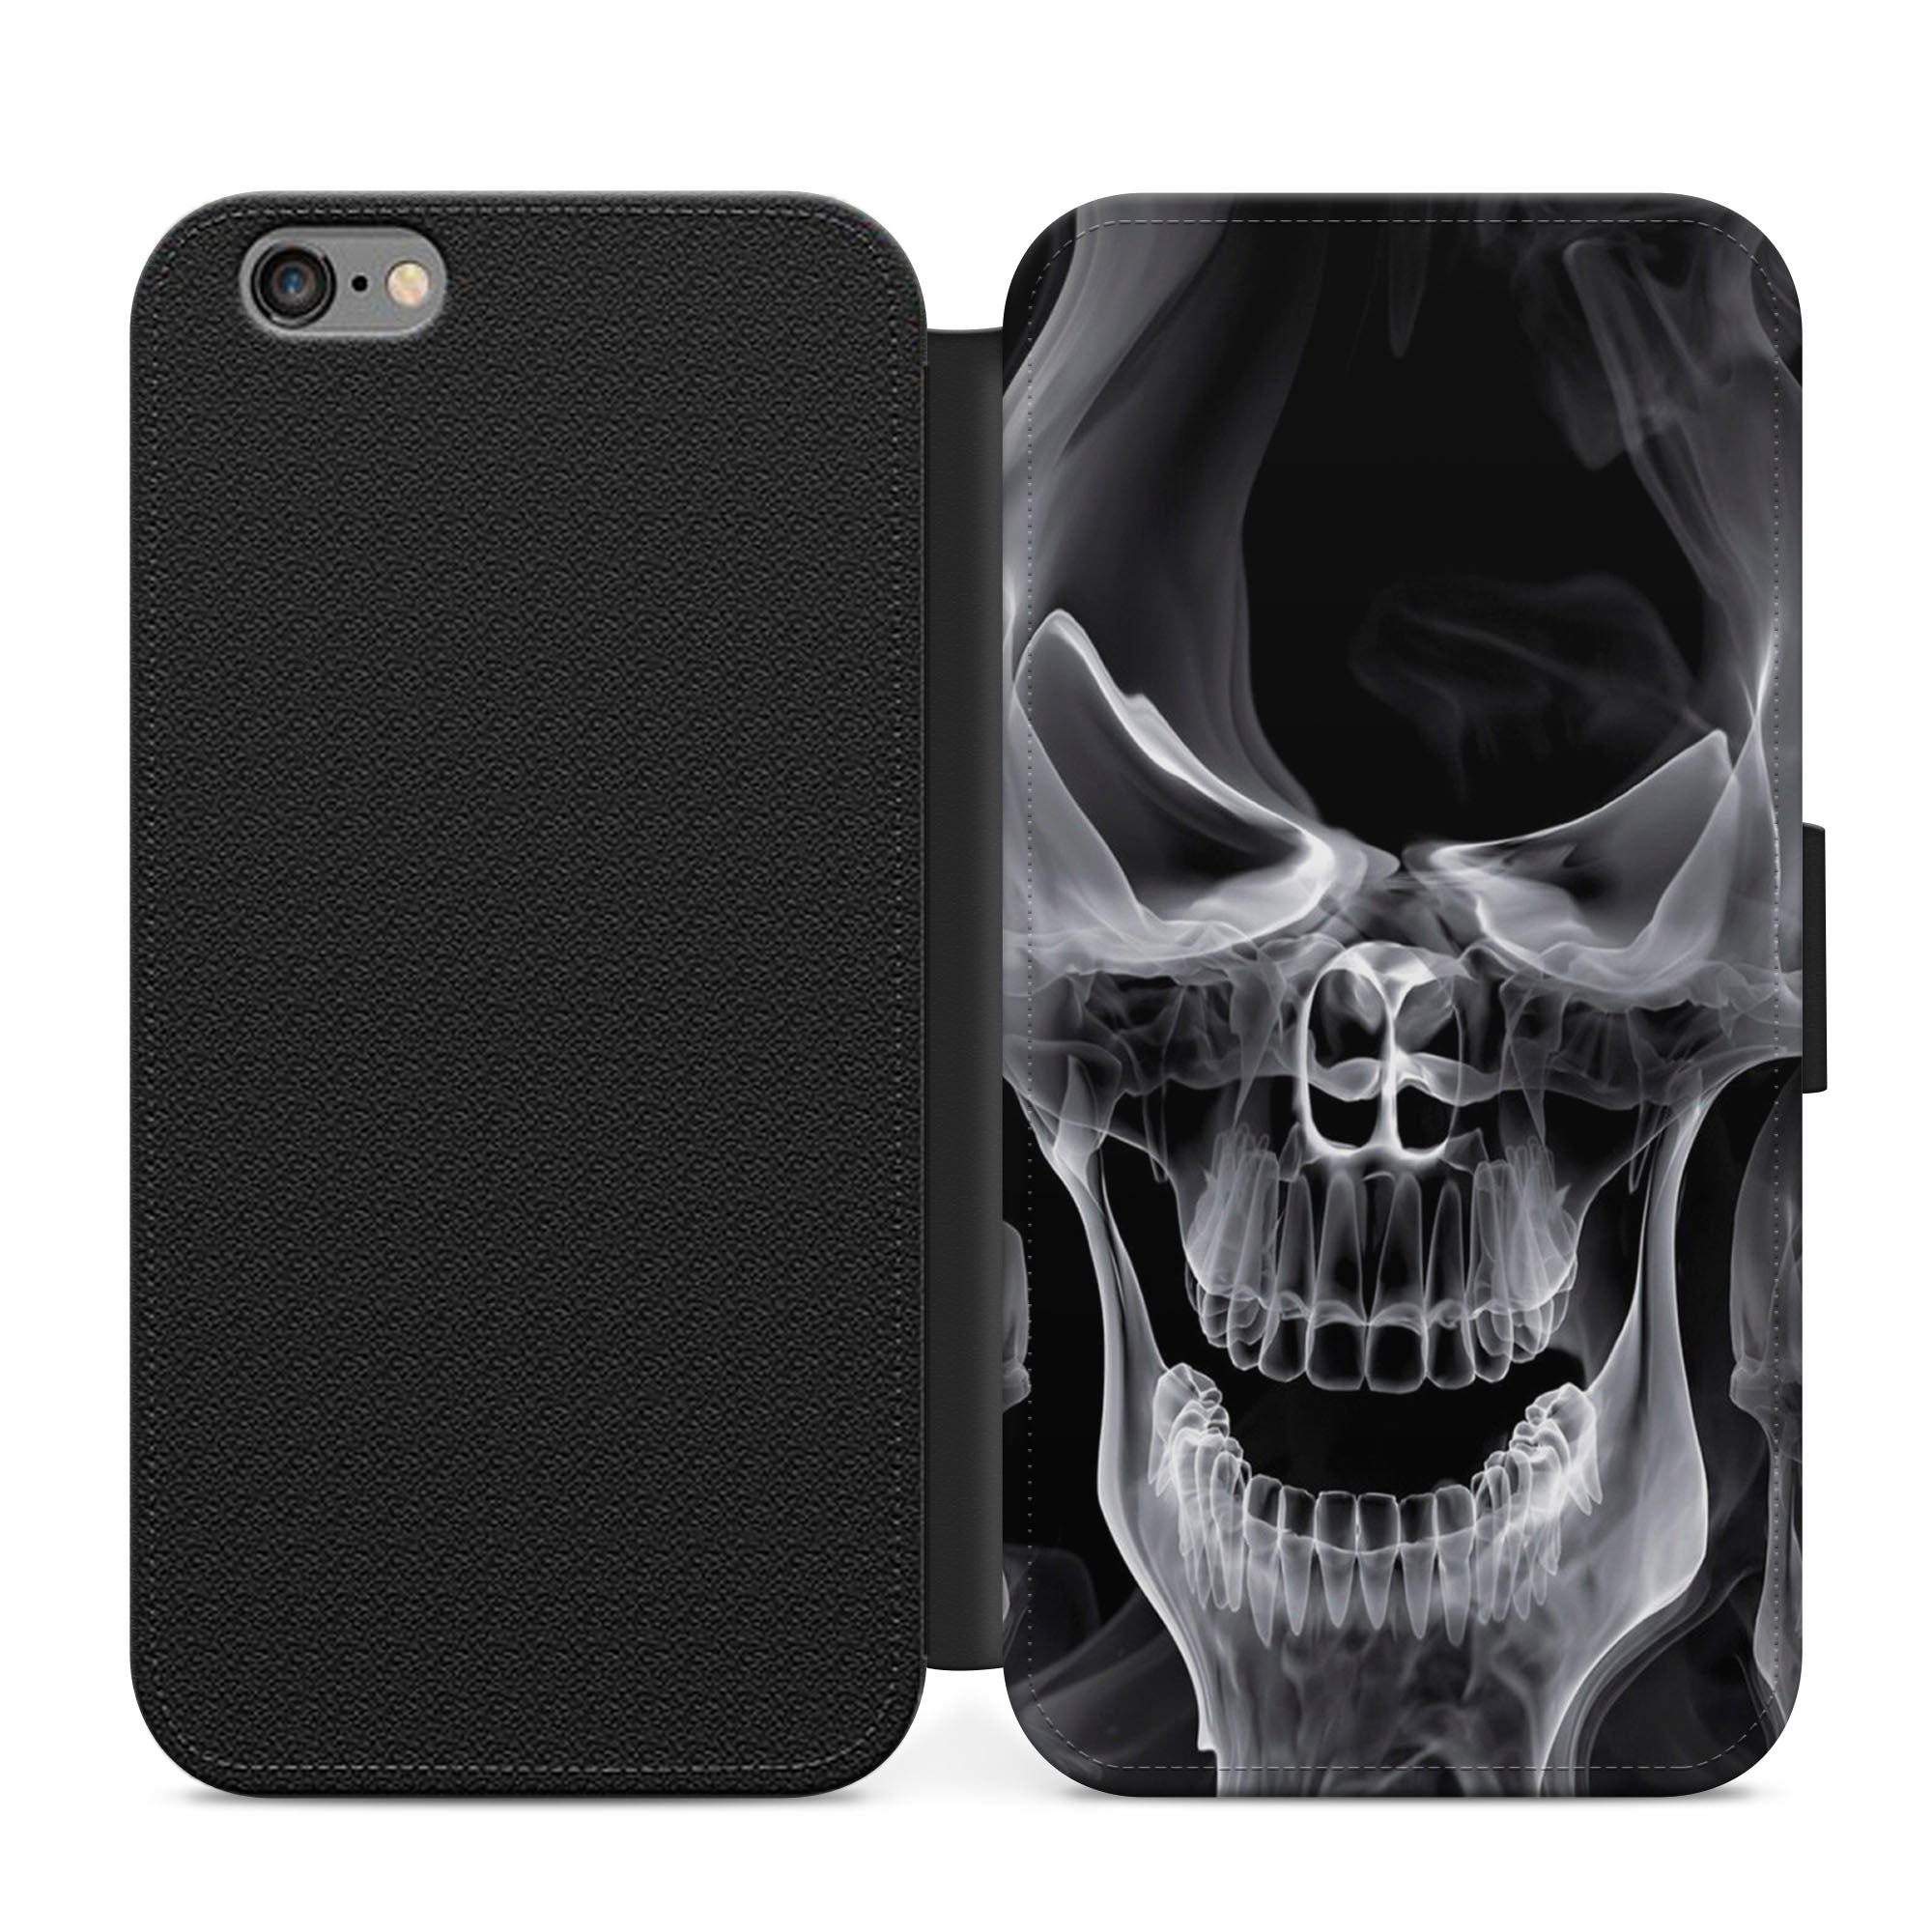 Smokey Skull Faux Leather Flip Case Wallet for iPhone / Samsung